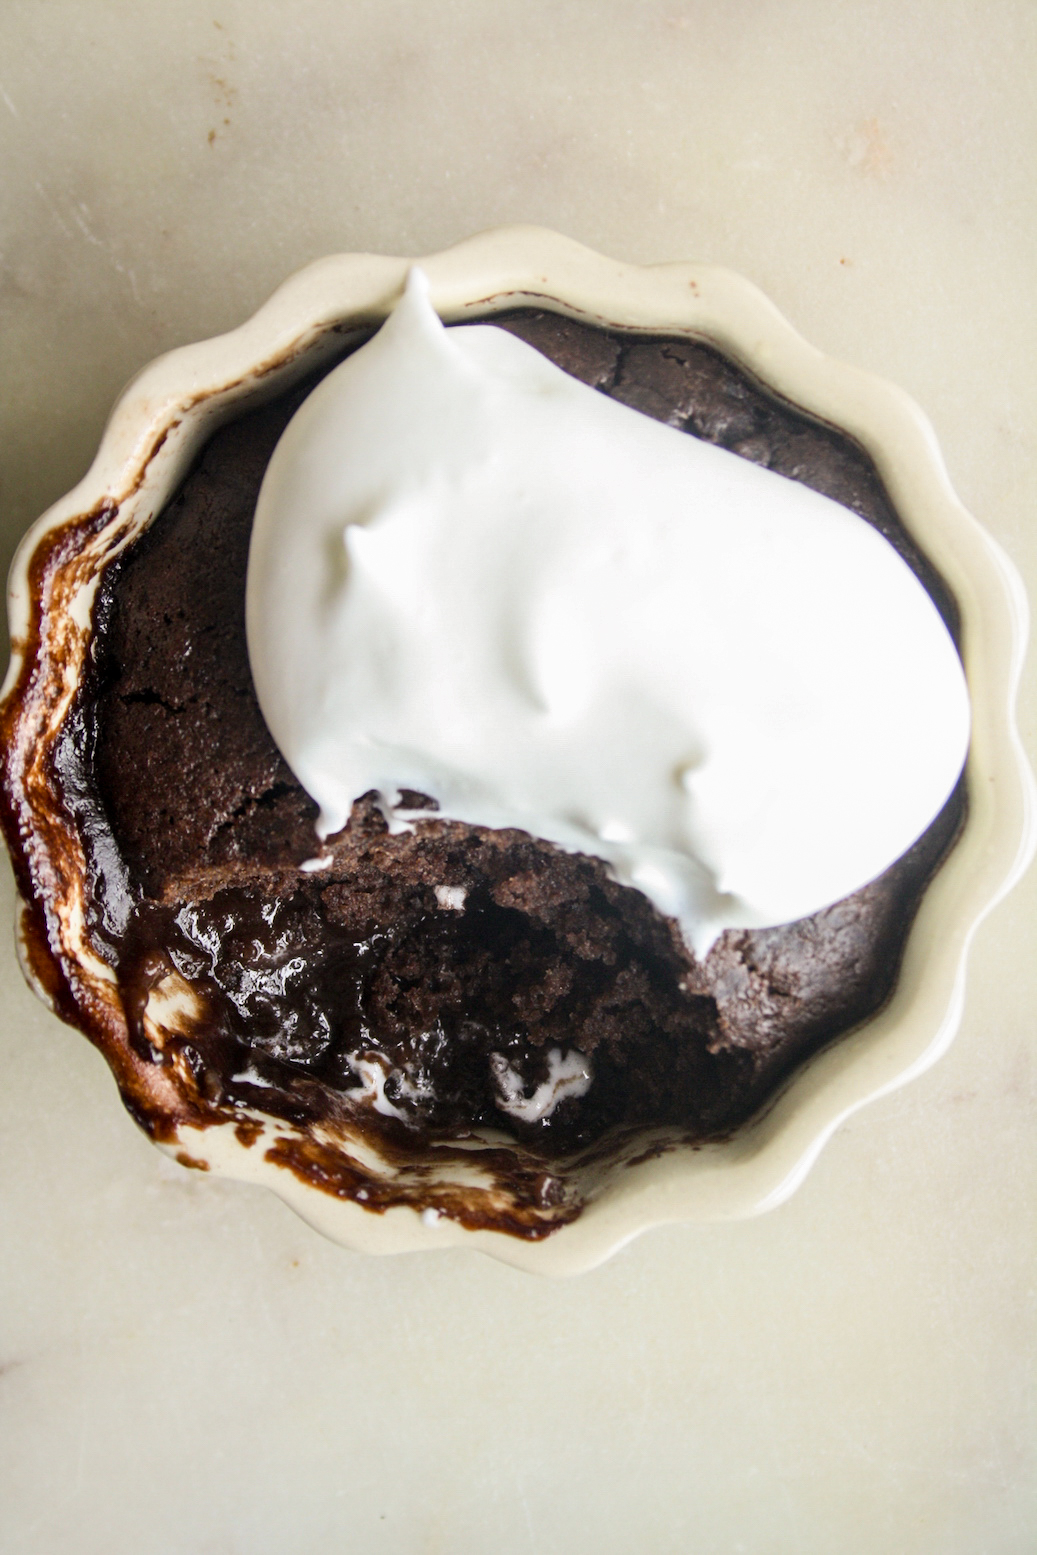 Moist chocolate whiskey puddings with a caramel sauce created as the puddings bake!